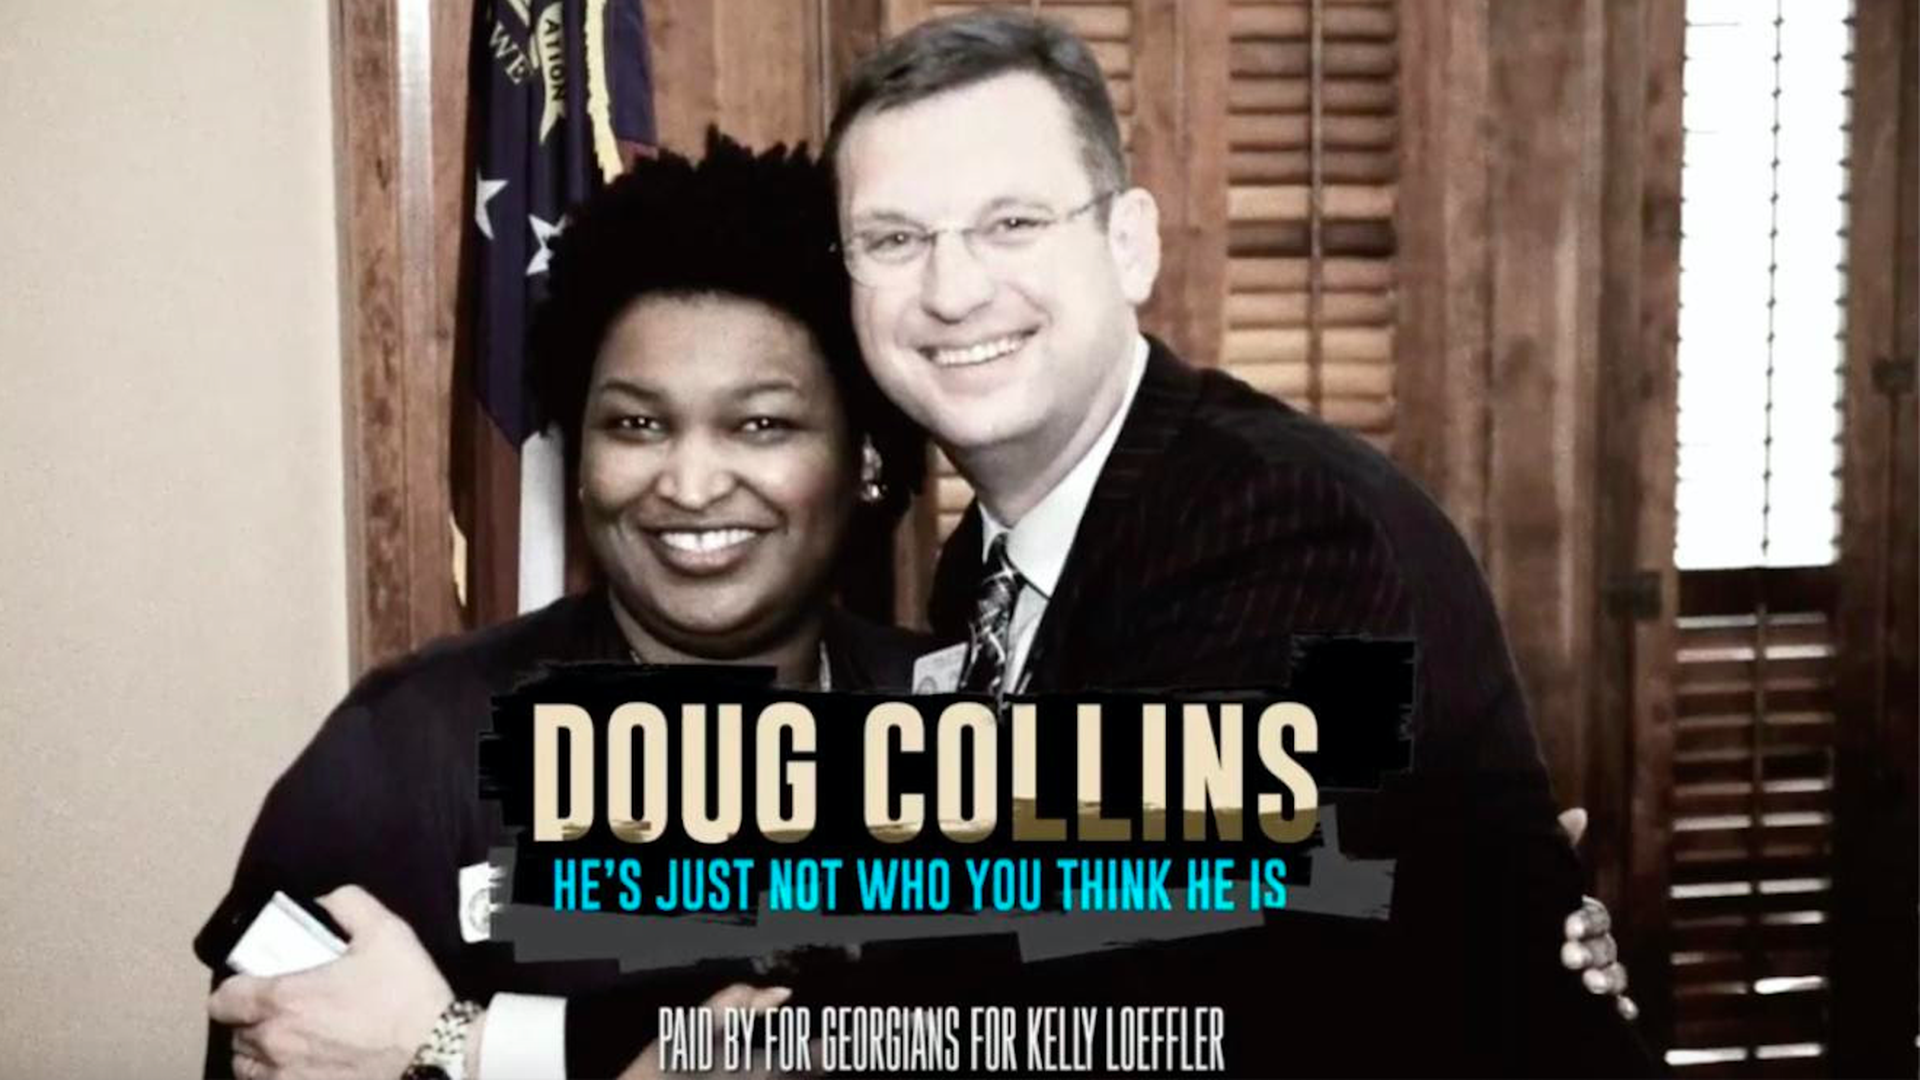 A screenshot of Kelly Loeffler's campaign ad showing Doug Collins hugging Stacey Abrams